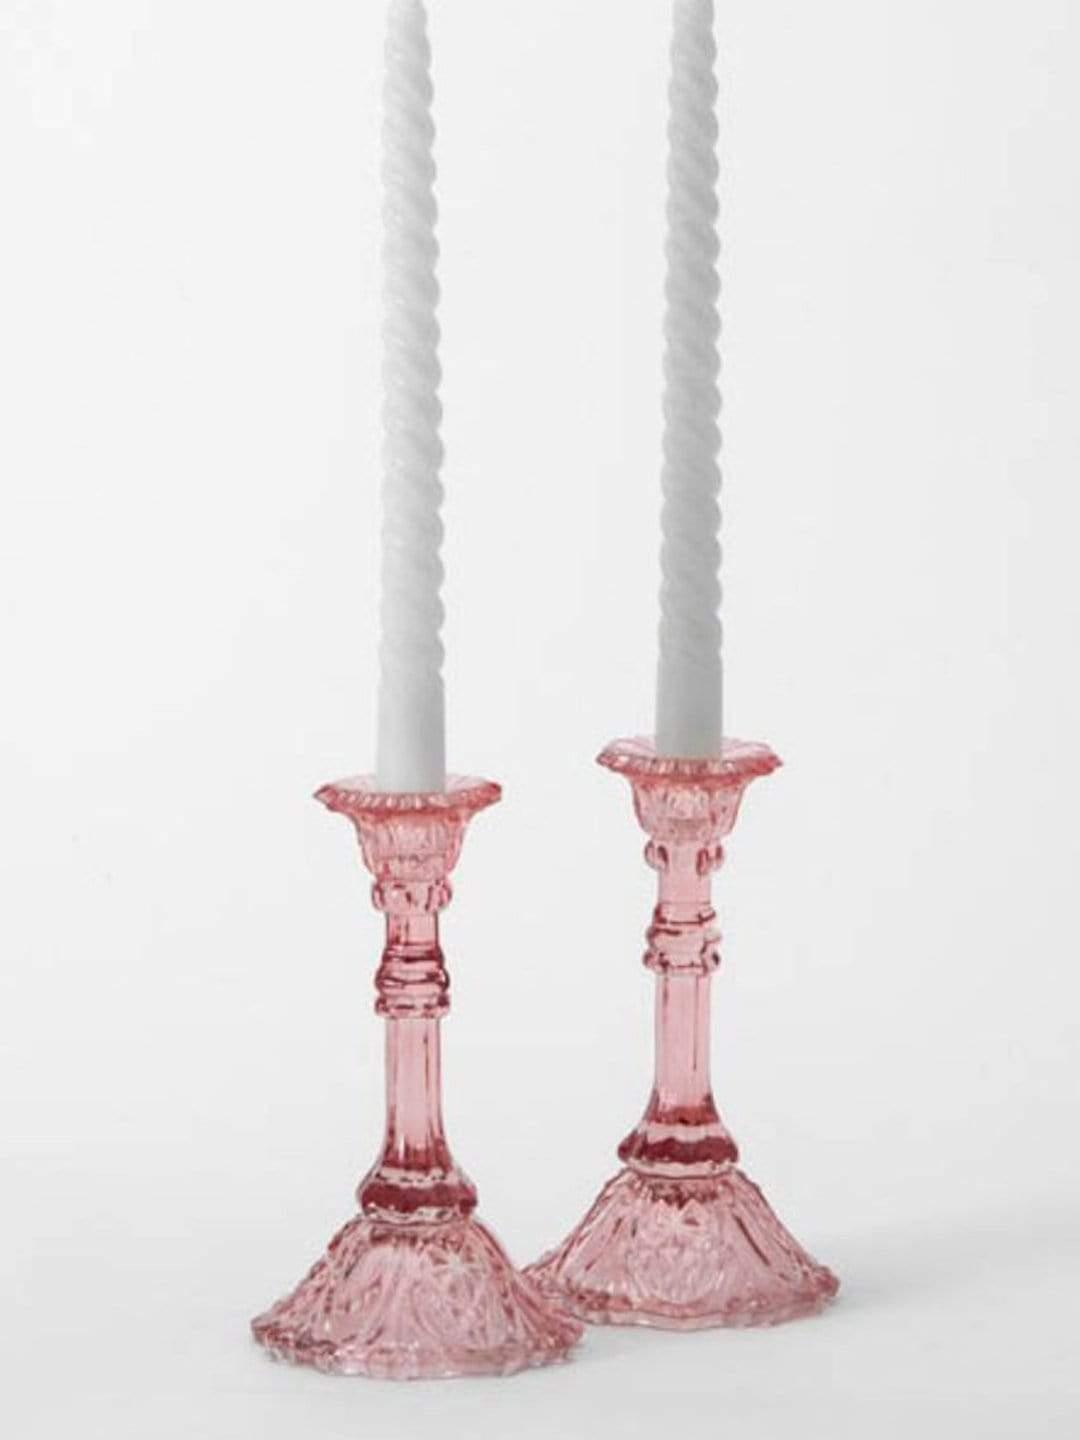 Vintage Recyled Glass Candle Holders - Tall - Set Of 2 - The Wishing Chair